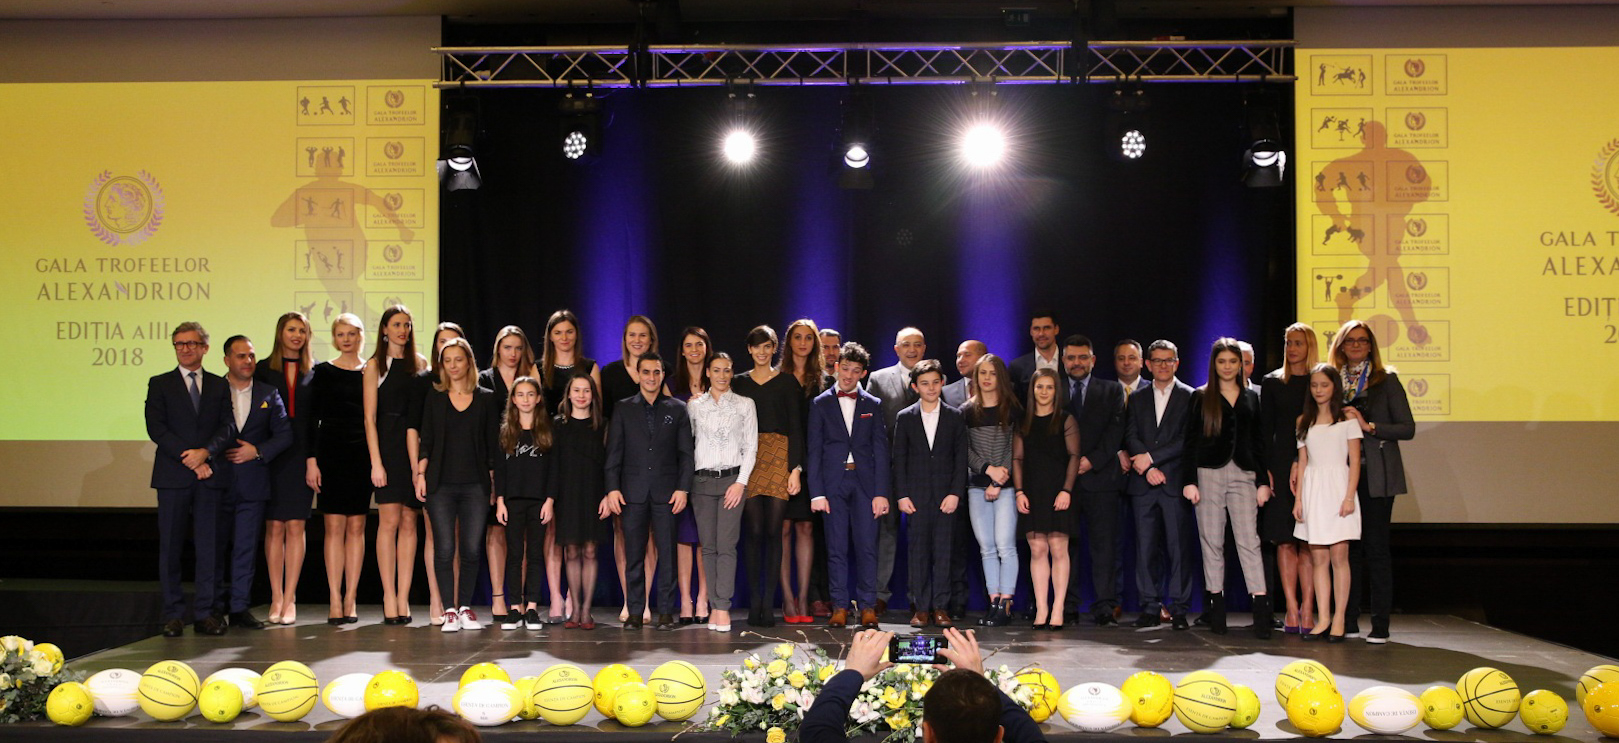 The winners of the Alexandrion Trophies – the third edition – have been awarded